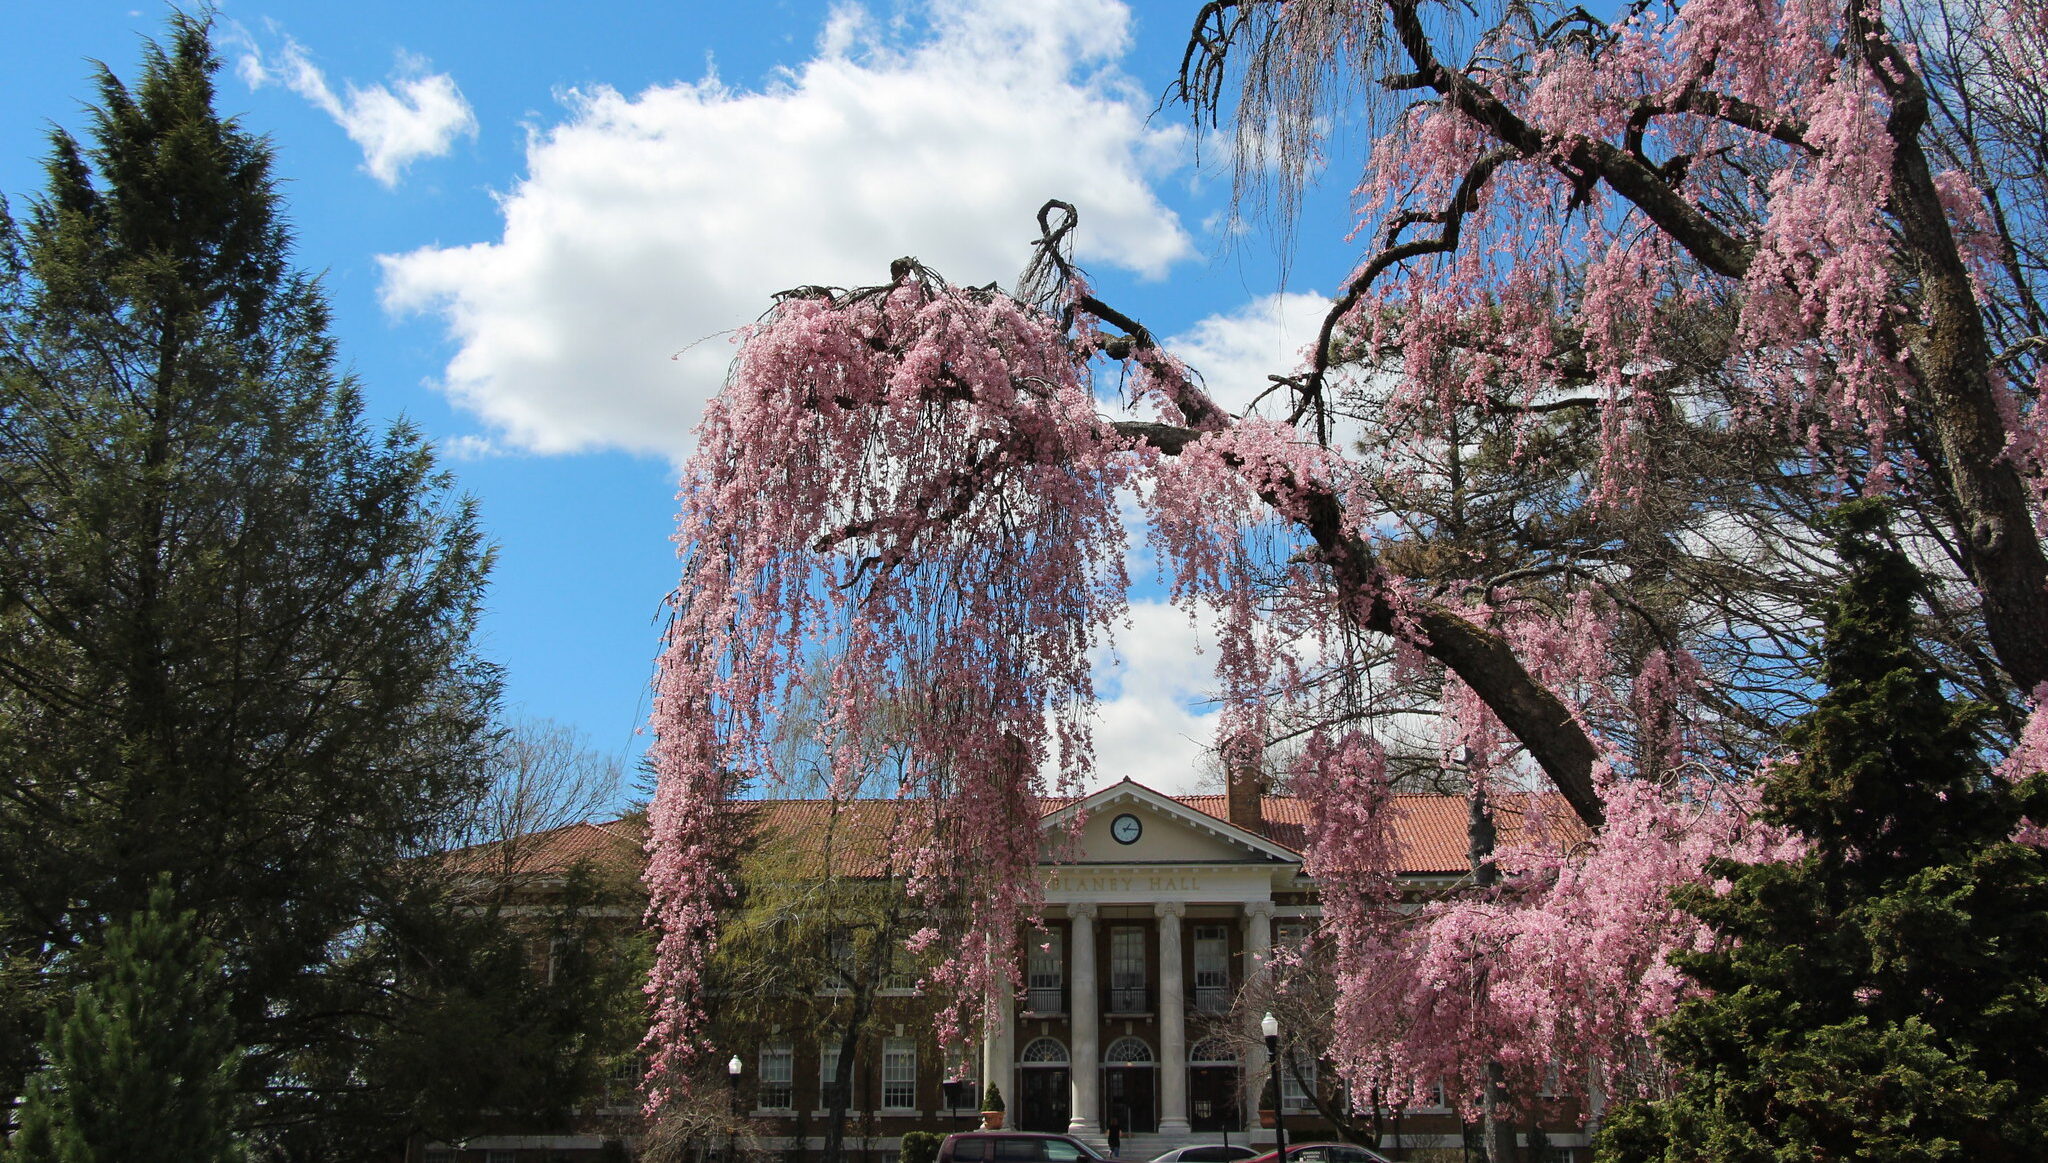 The Cedar Crest College campus with a pink tree